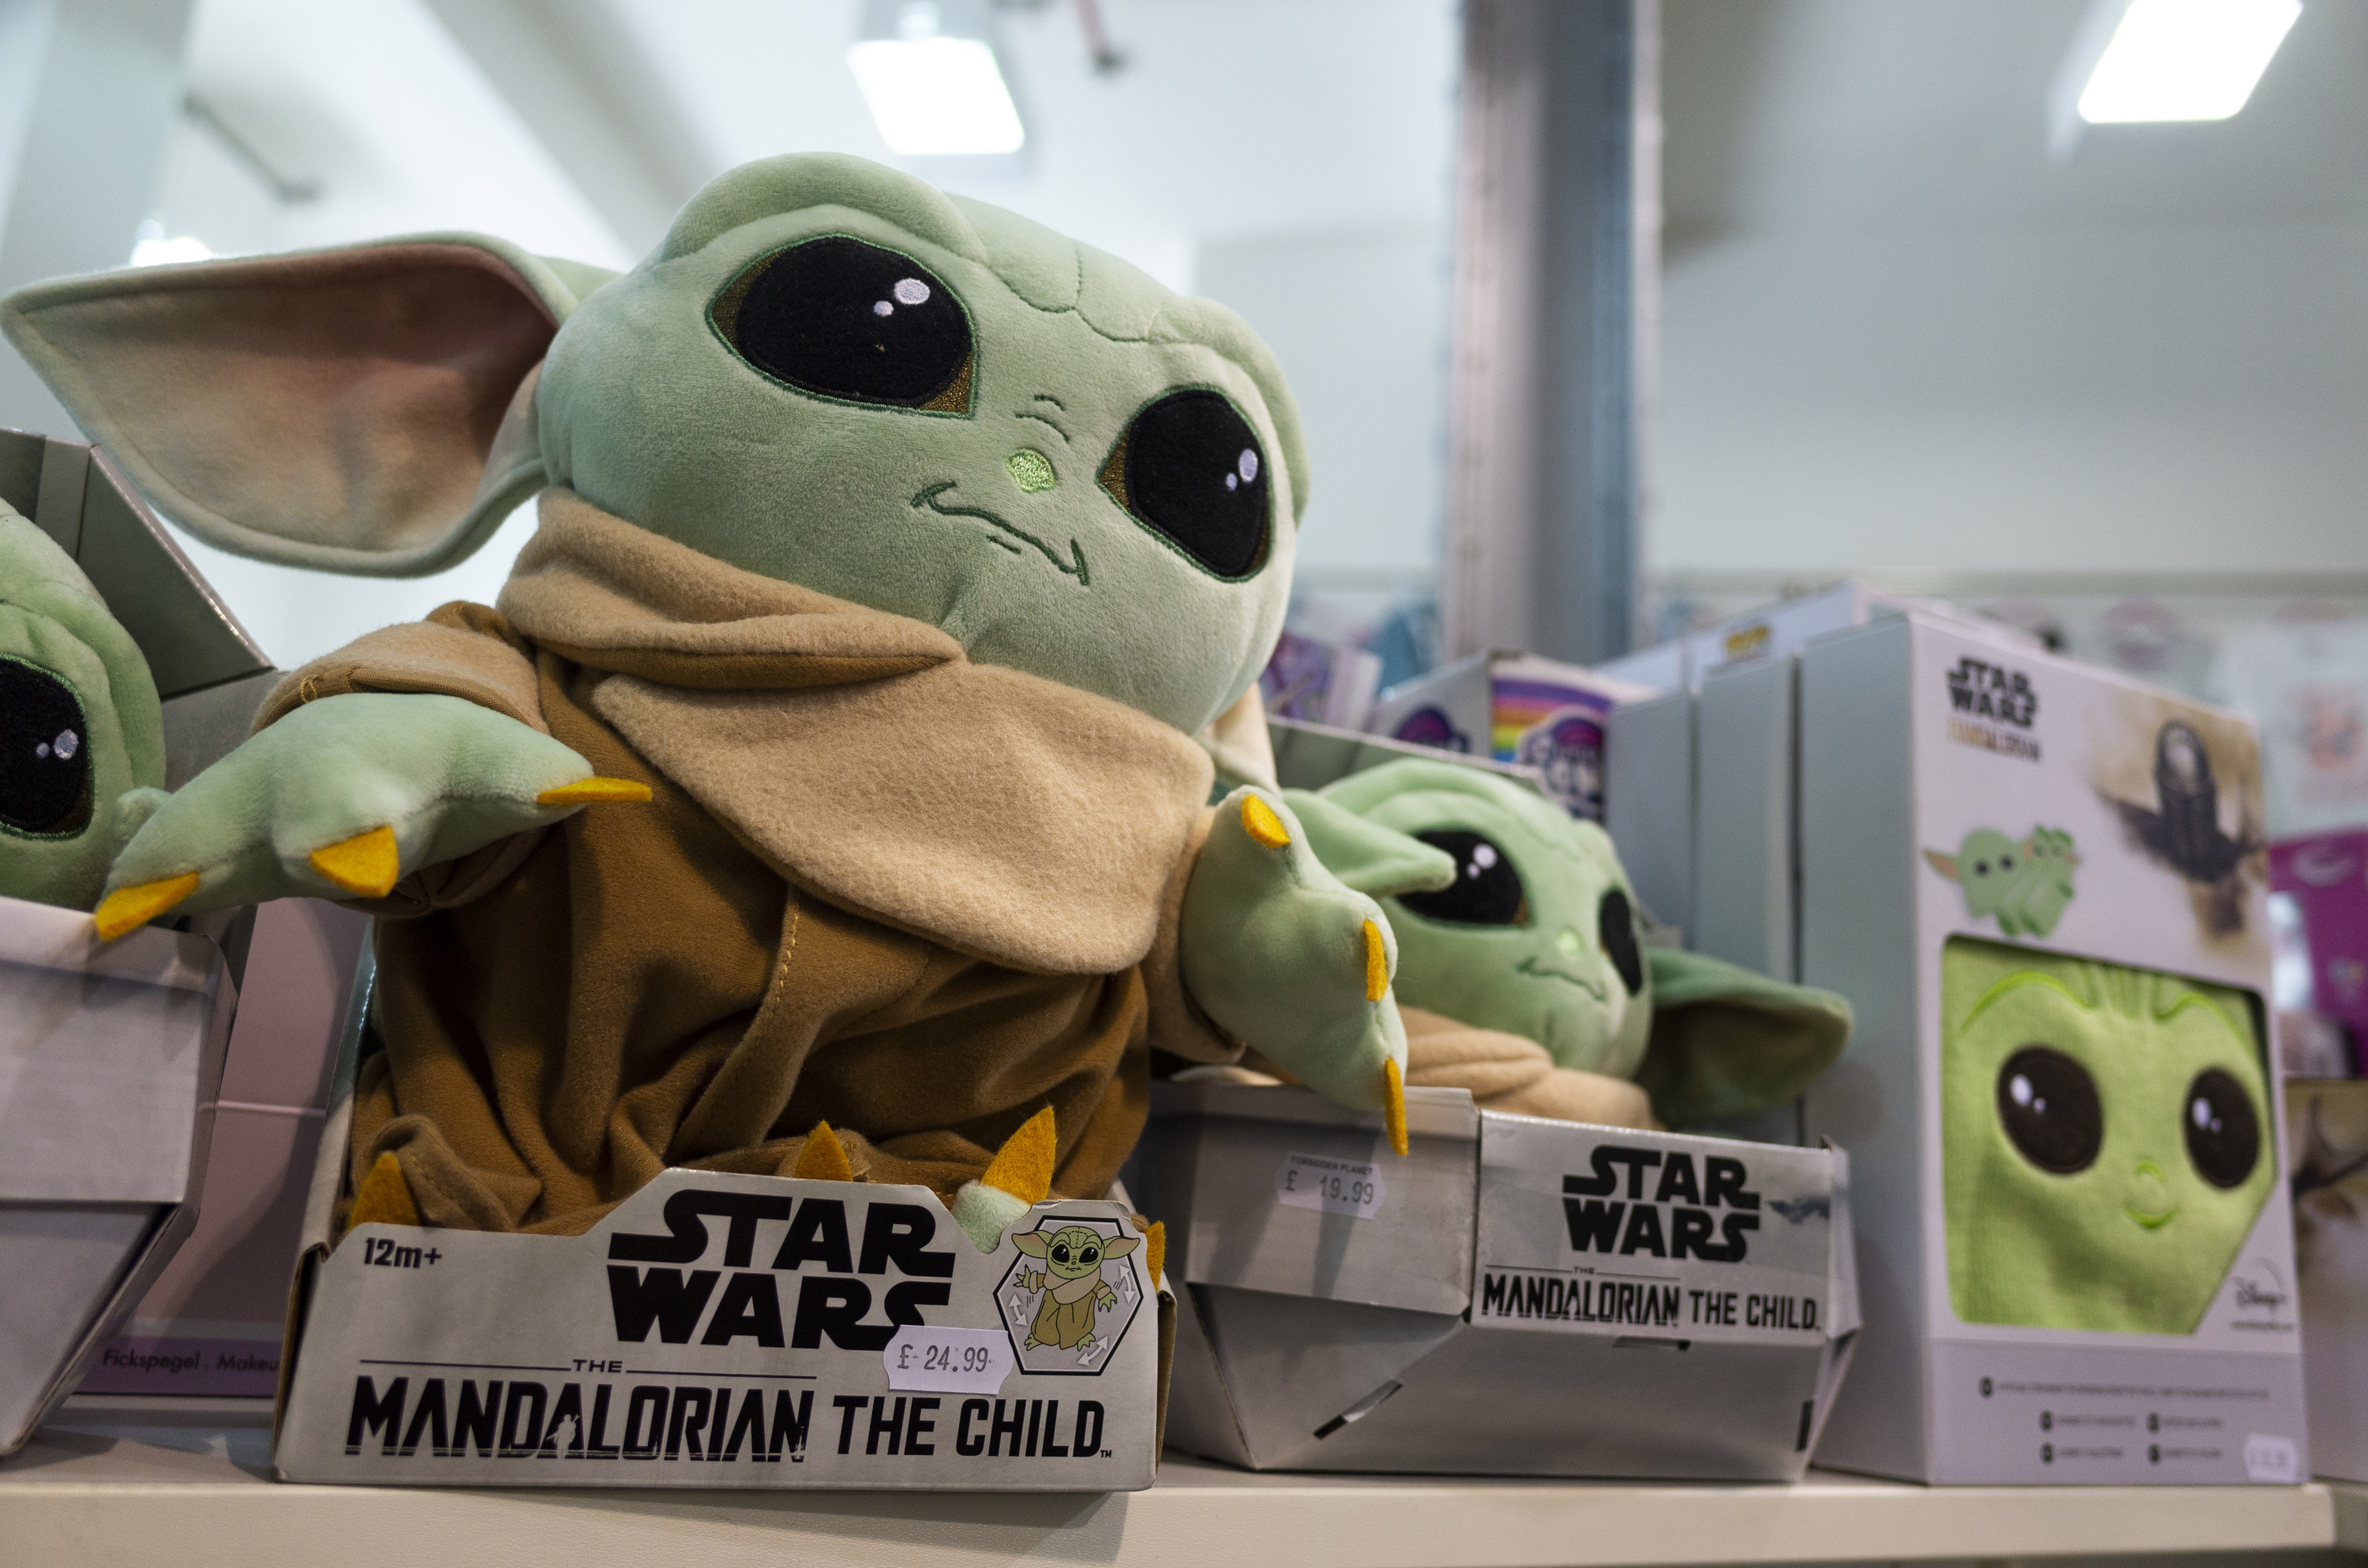 Baby Yoda, a popular character from the Mandalorian branch of the Star Wars franchise, merchandise on sale as fans across the world celebrate Star Wars Day on 30th April, 2022 in Leeds, United Kingdom.